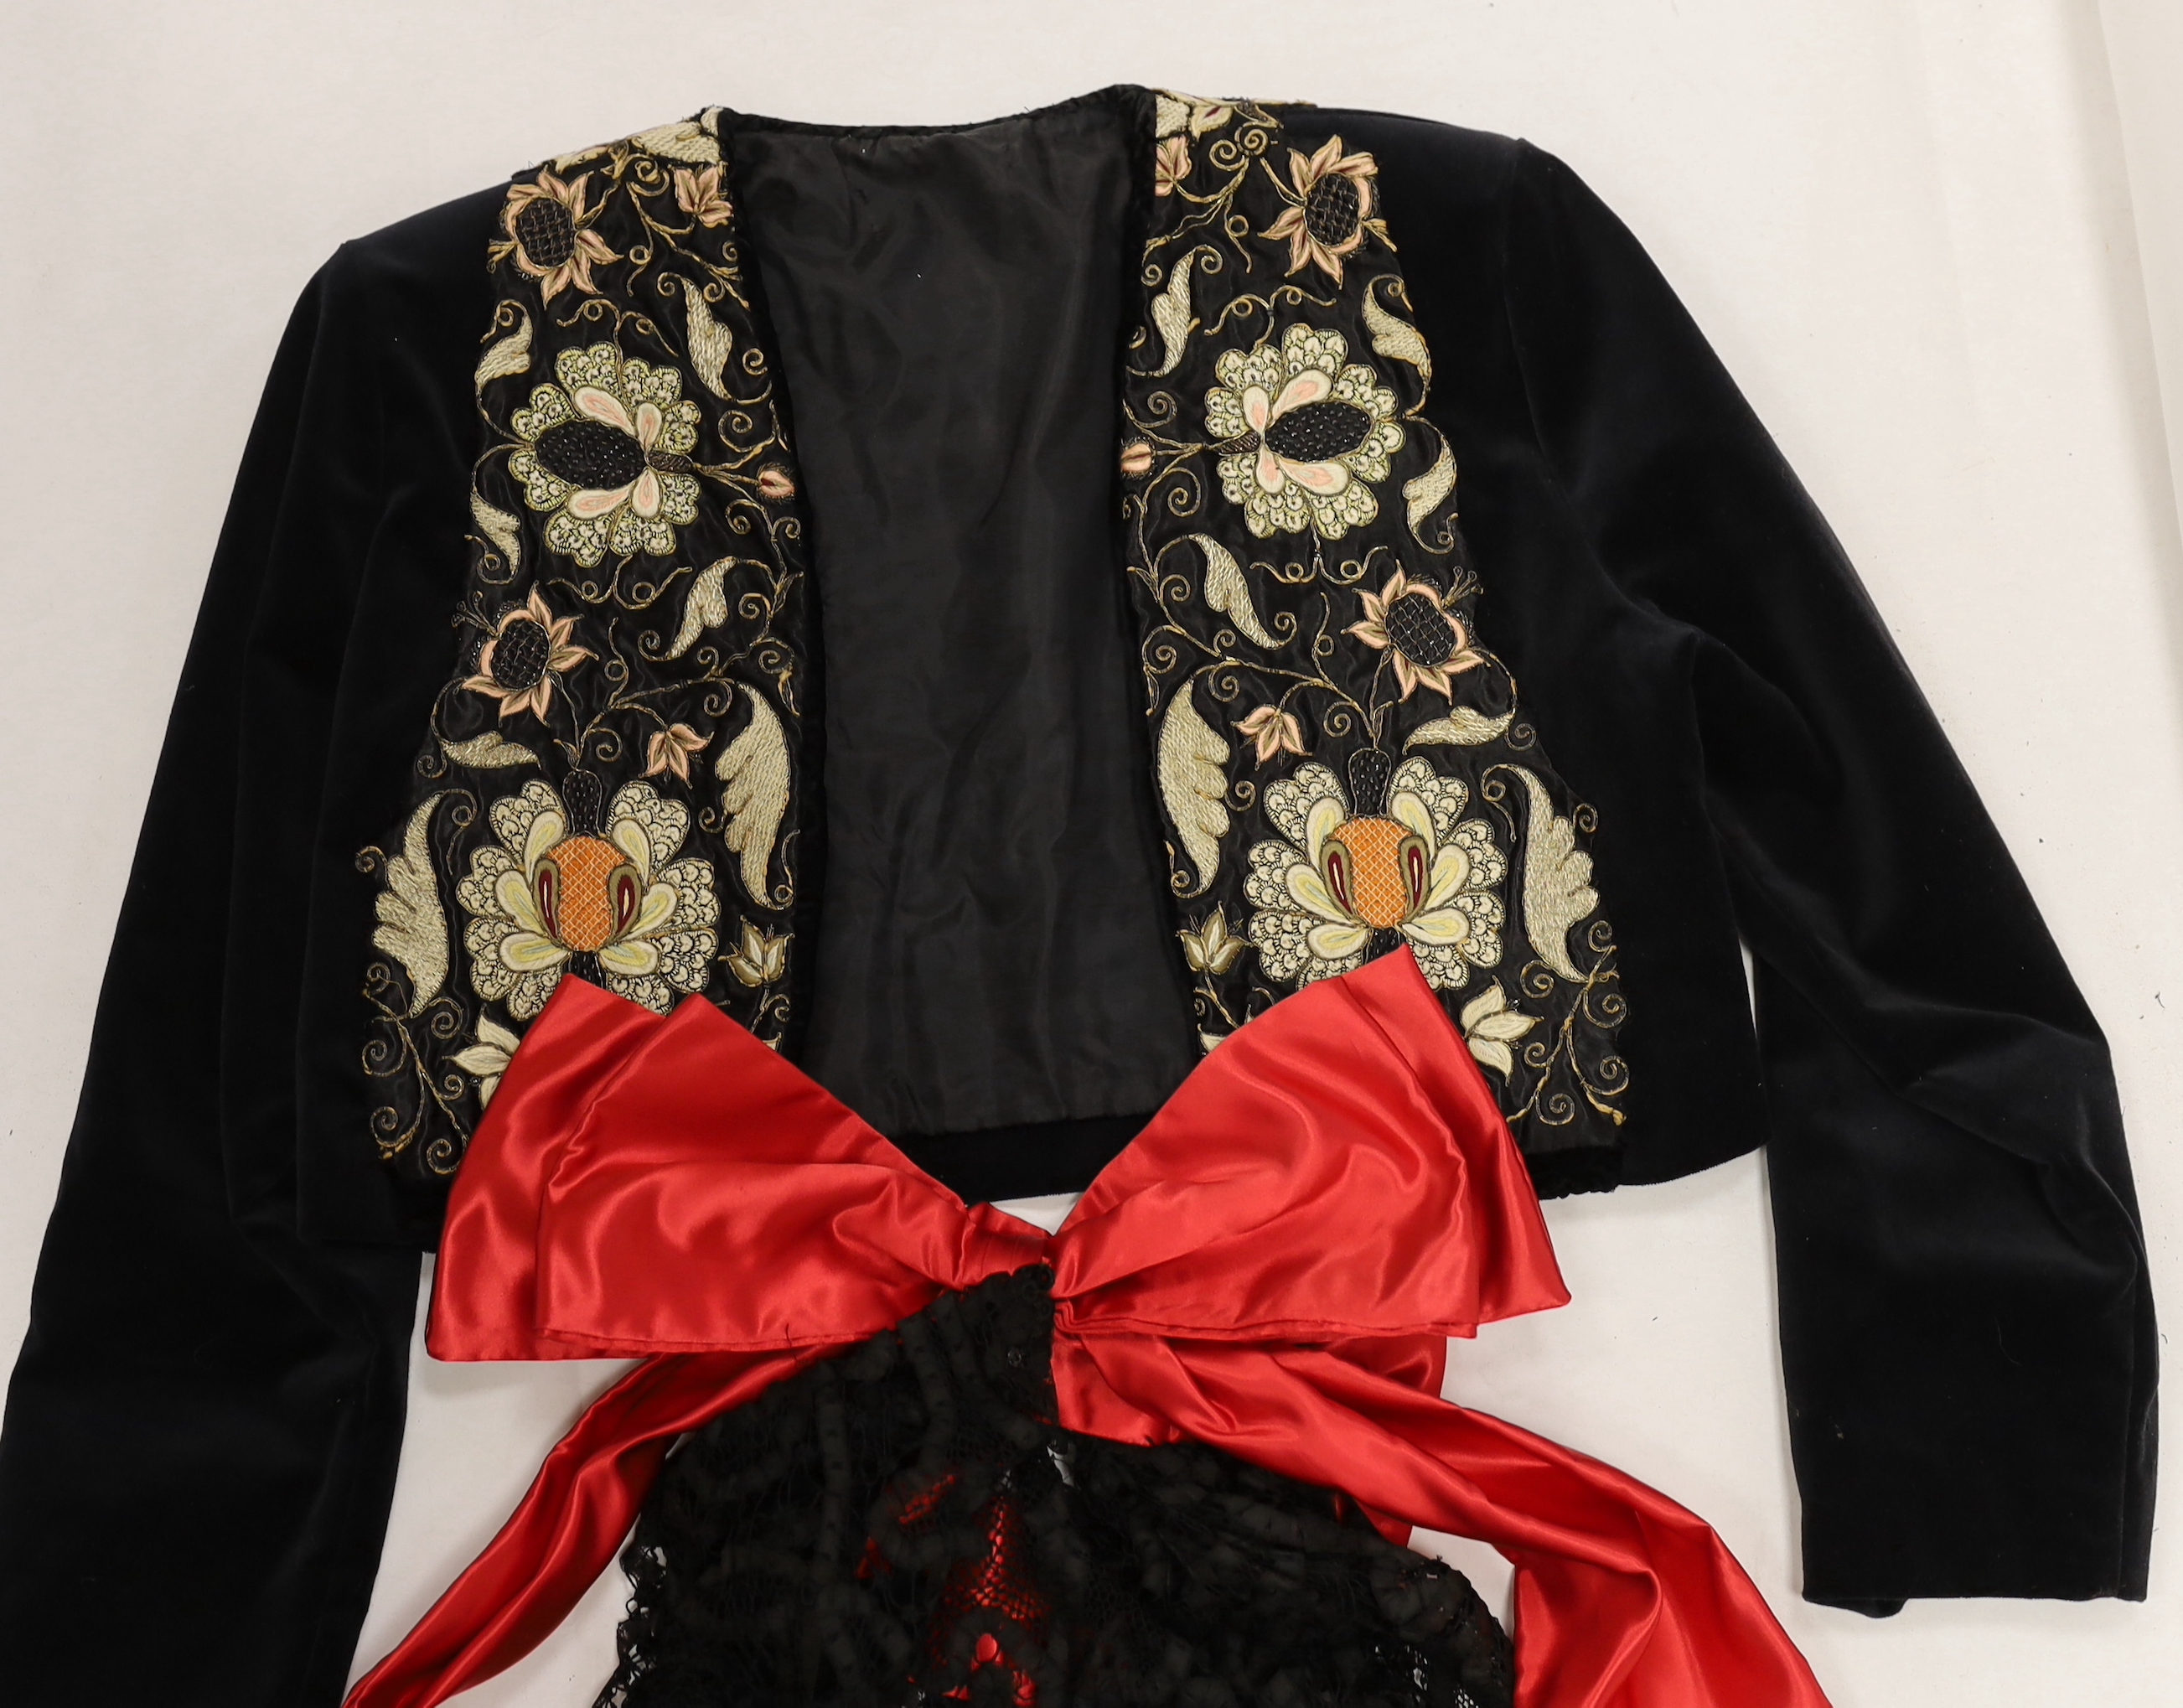 A velvet bolero with ornate polychrome silk embroidered and beaded panels, together with a full length black tape lace evening skirt (some damage) with red satin waisted sash